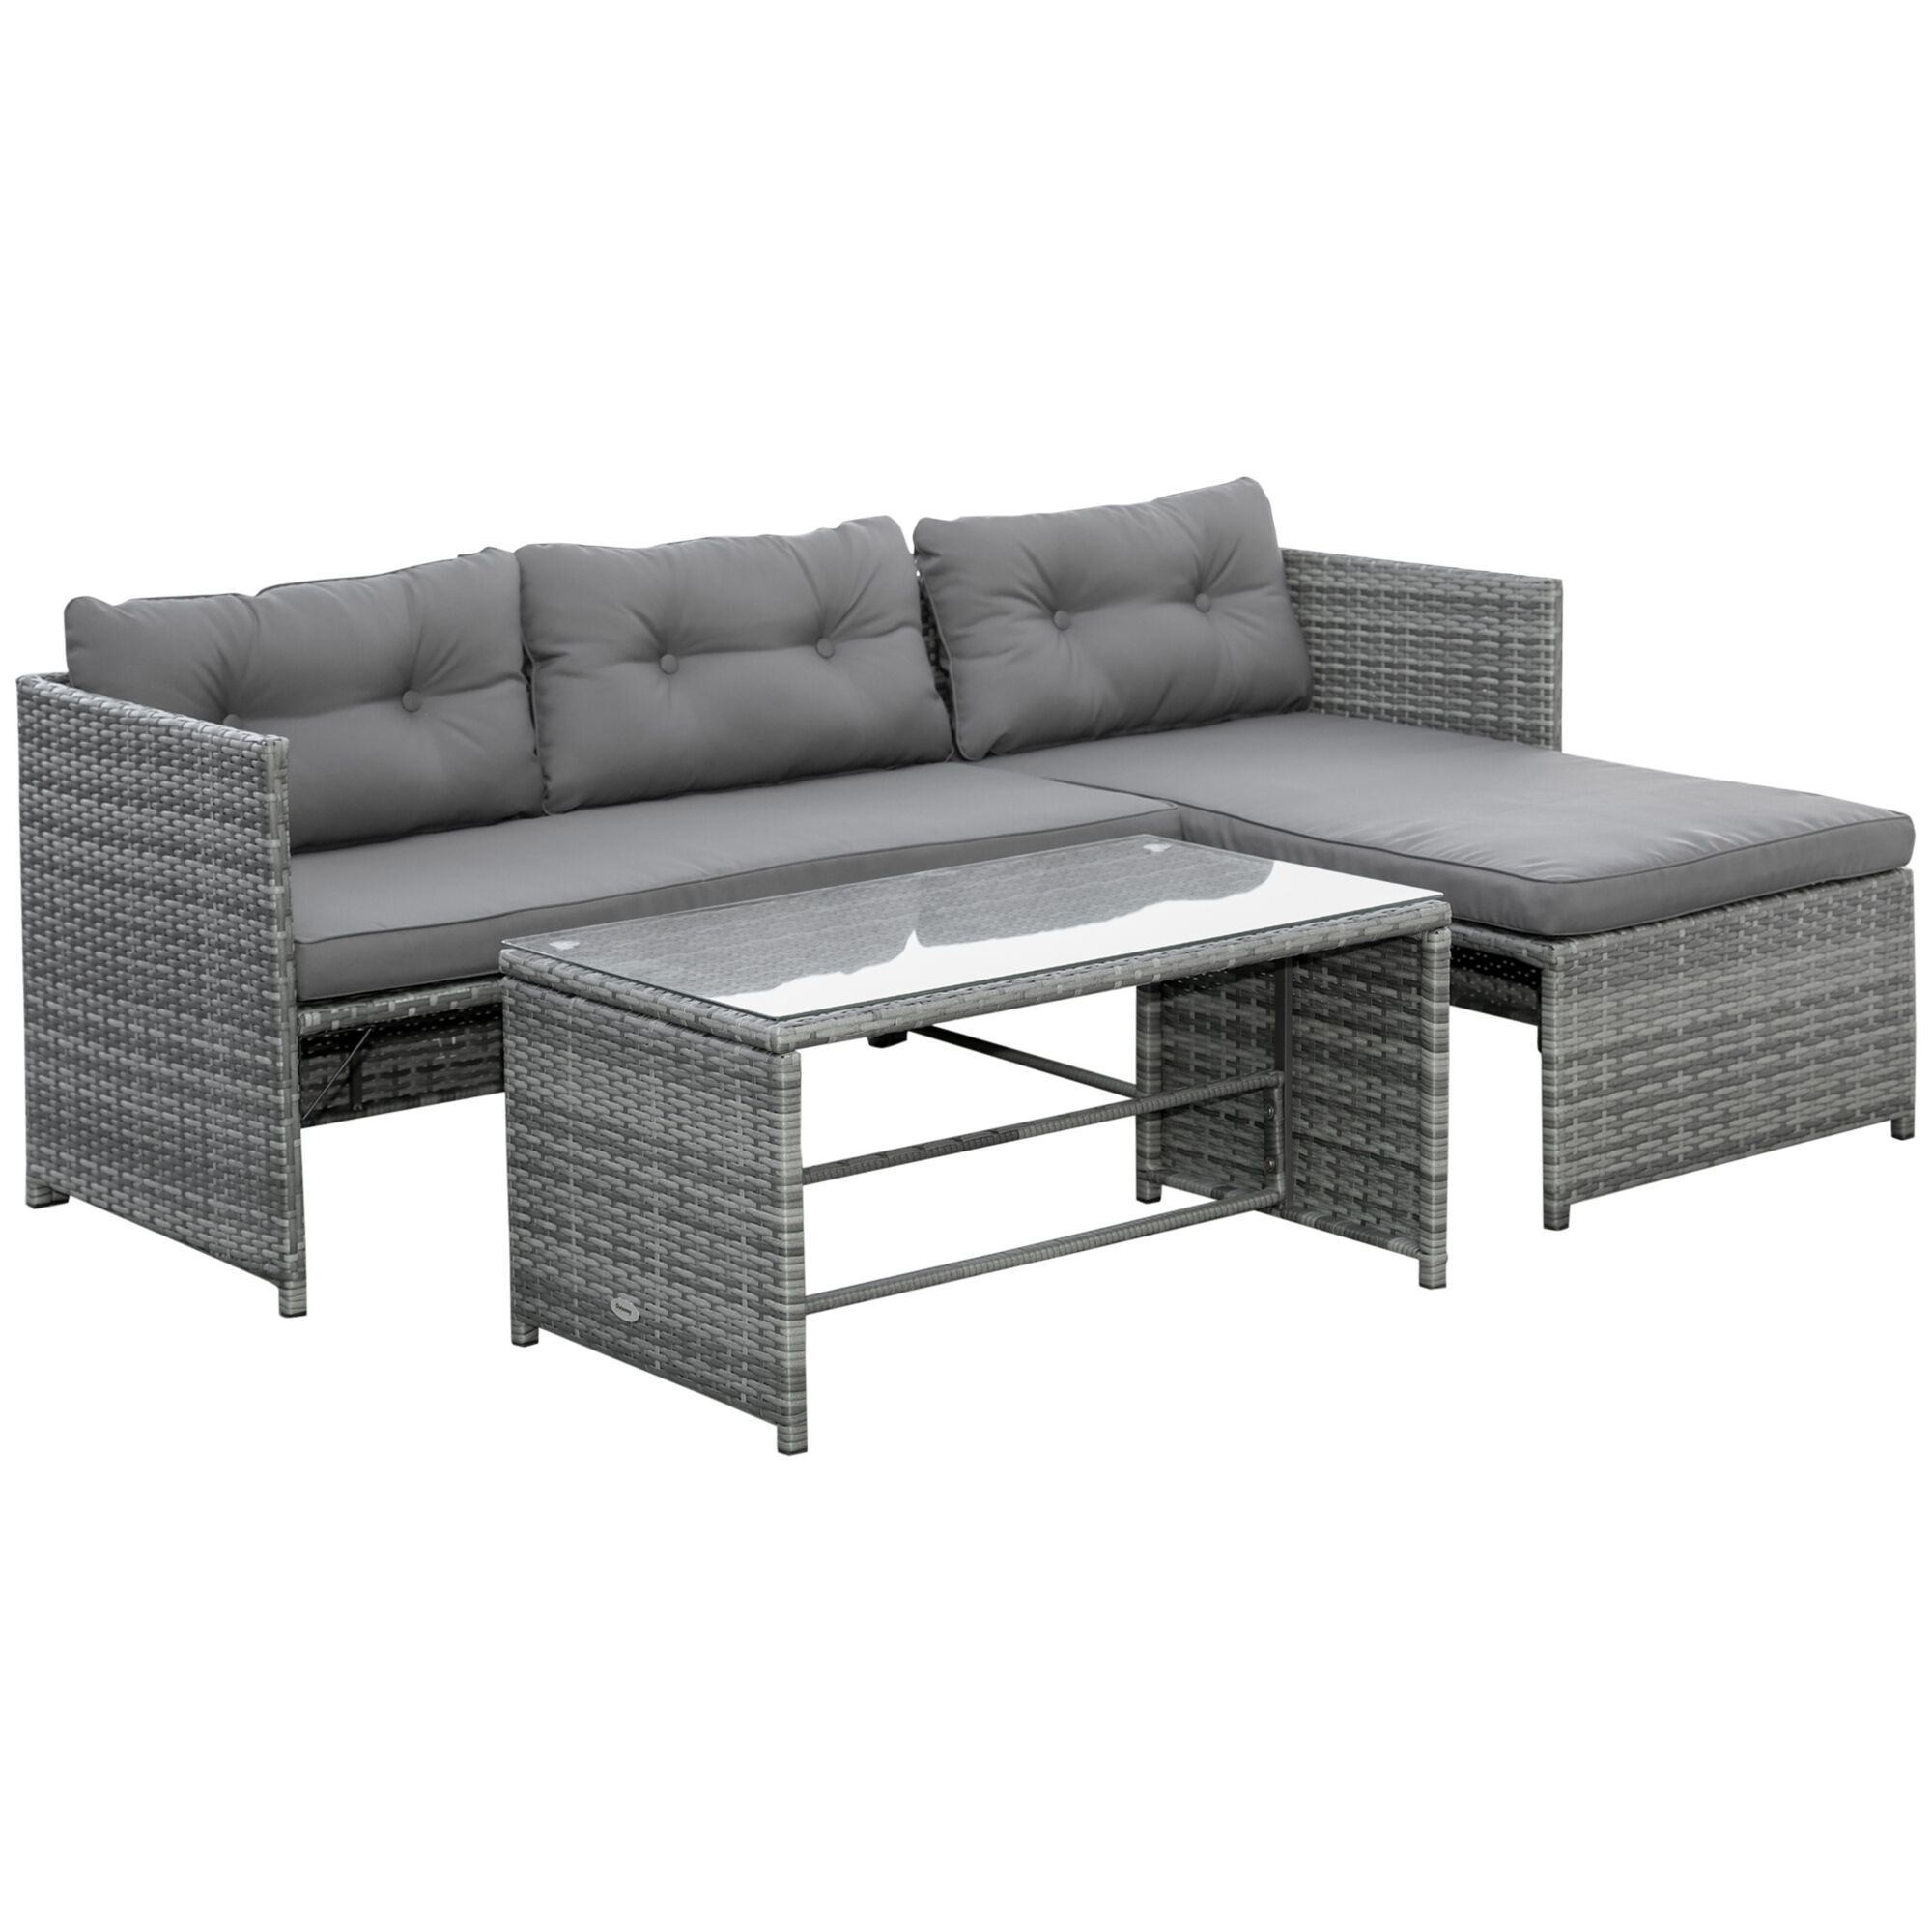 Outsunny 3-Piece Rattan Patio Furniture Sofa Set Conversation Set, Sectional Lounge Chaise Cushioned for Garden Poolside or Porch Lounging, Grey